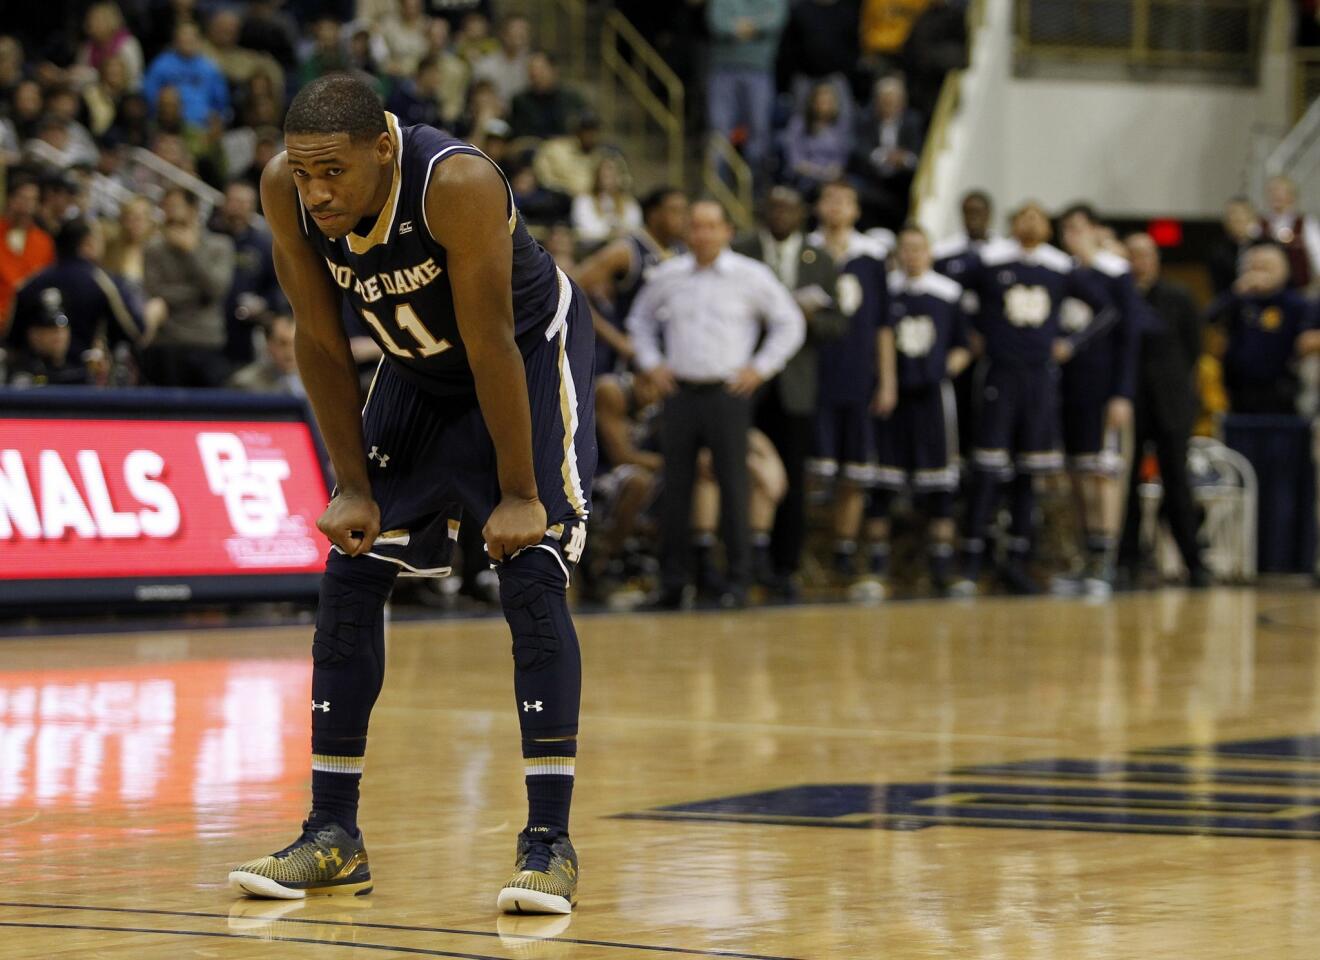 Notre Dame's Demetrius Jackson reacts late in the game.